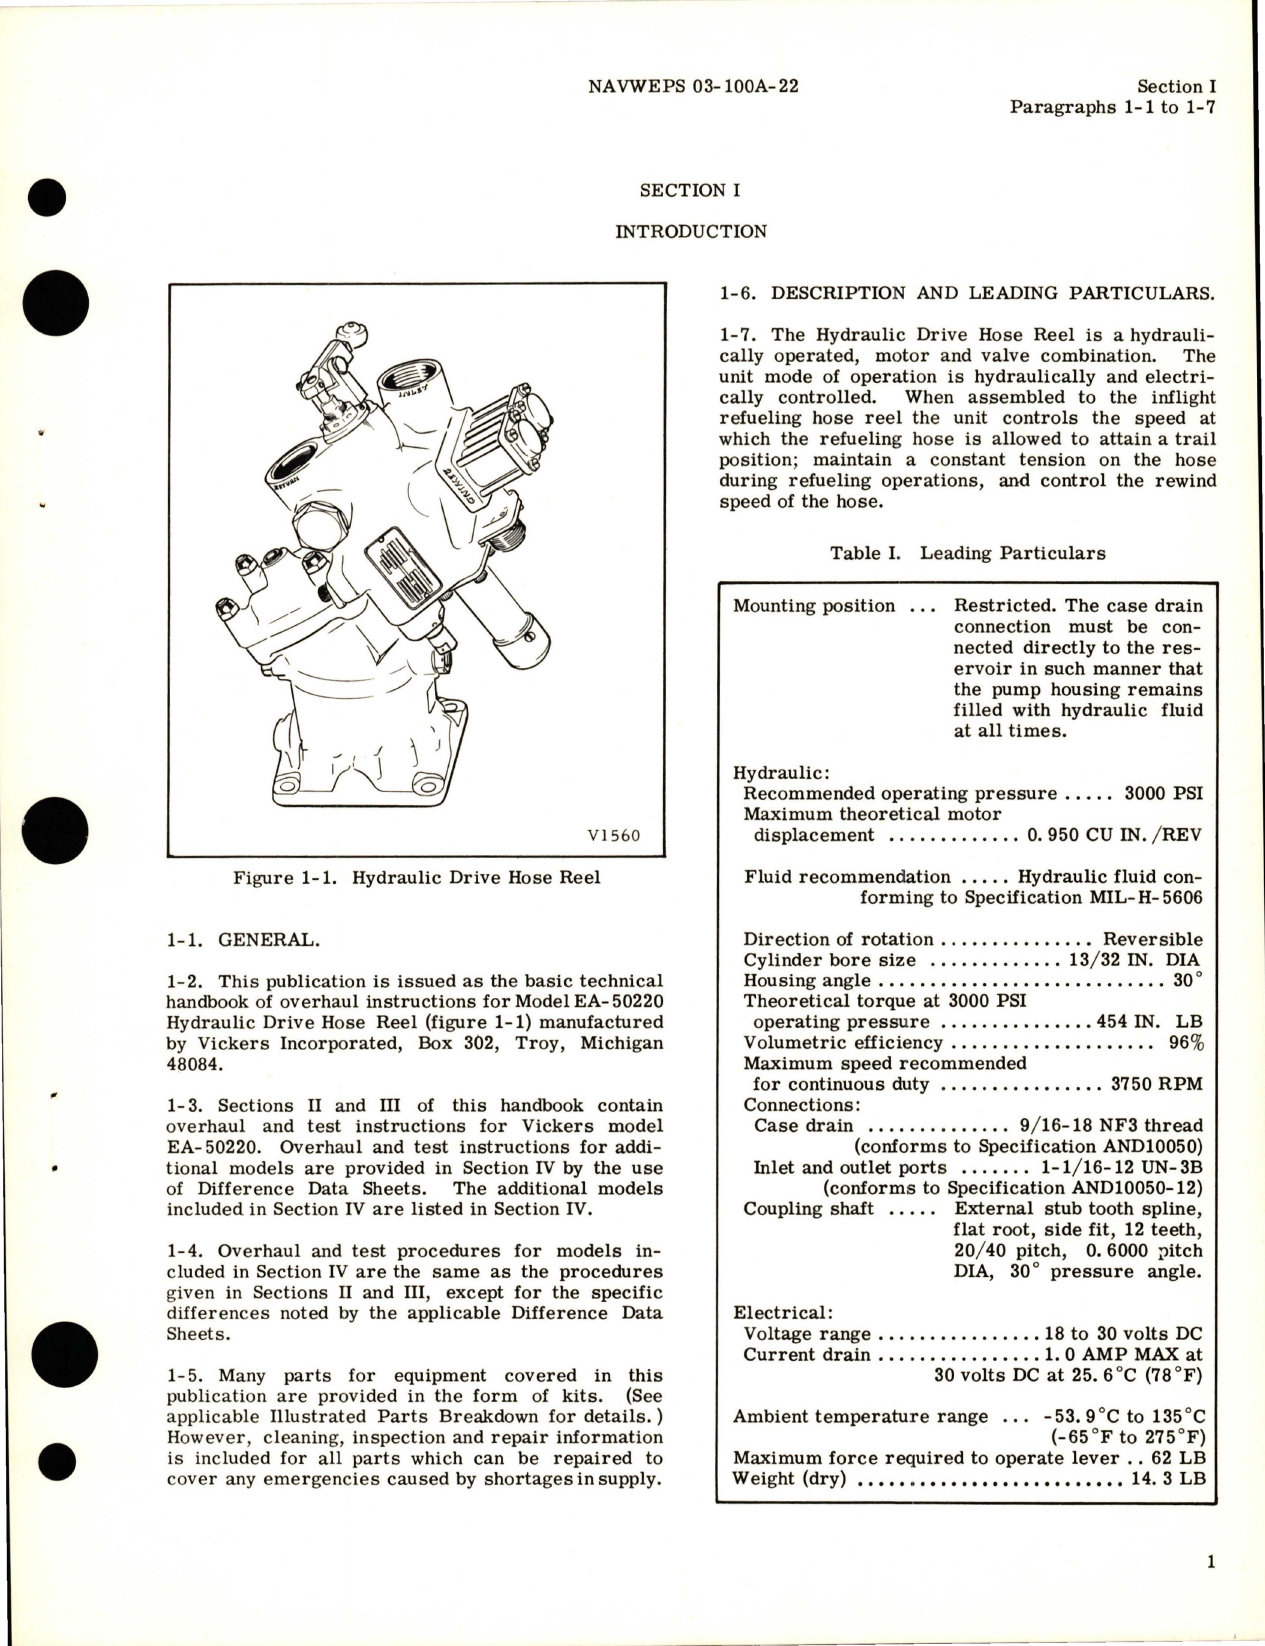 Sample page 5 from AirCorps Library document: Overhaul Instructions for Hydraulic Drive Hose Reel - Model EA-50220, EA-50238 